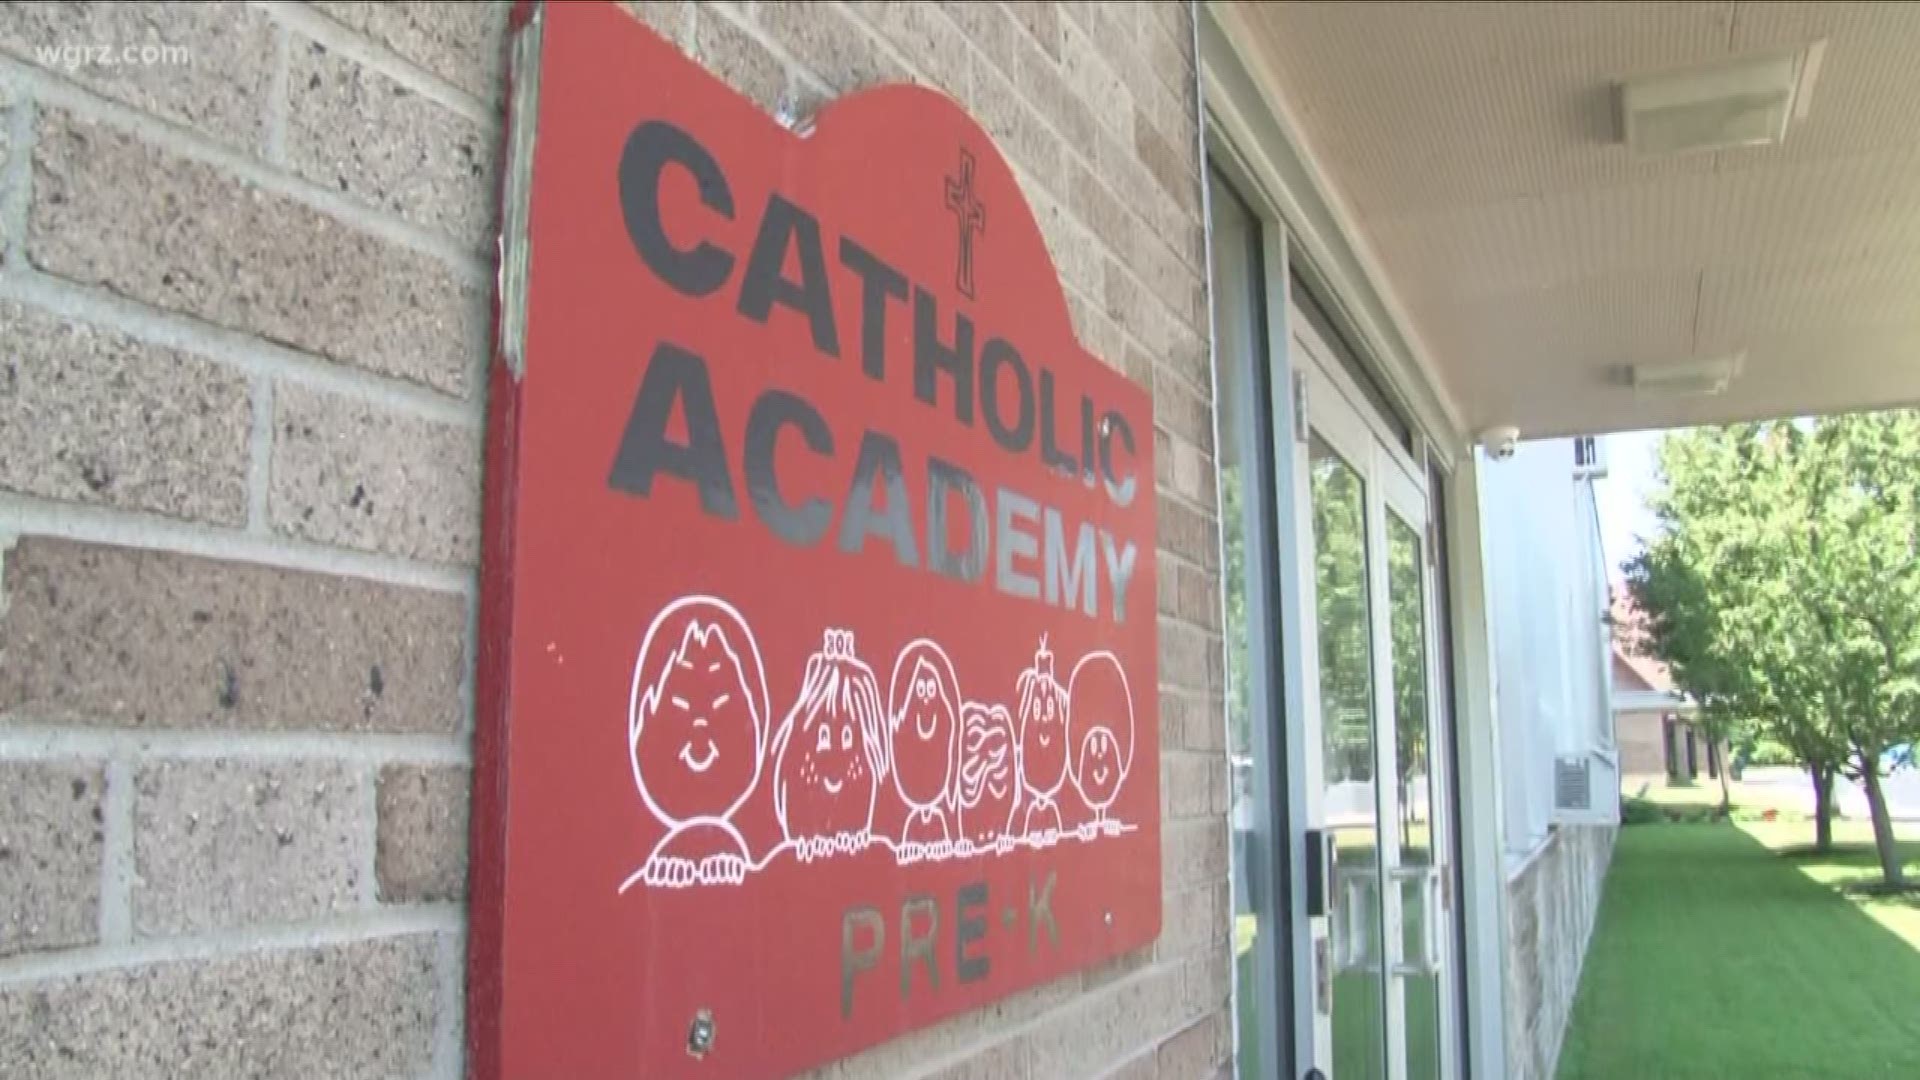 Catholic Academy adding classes to help displaced students